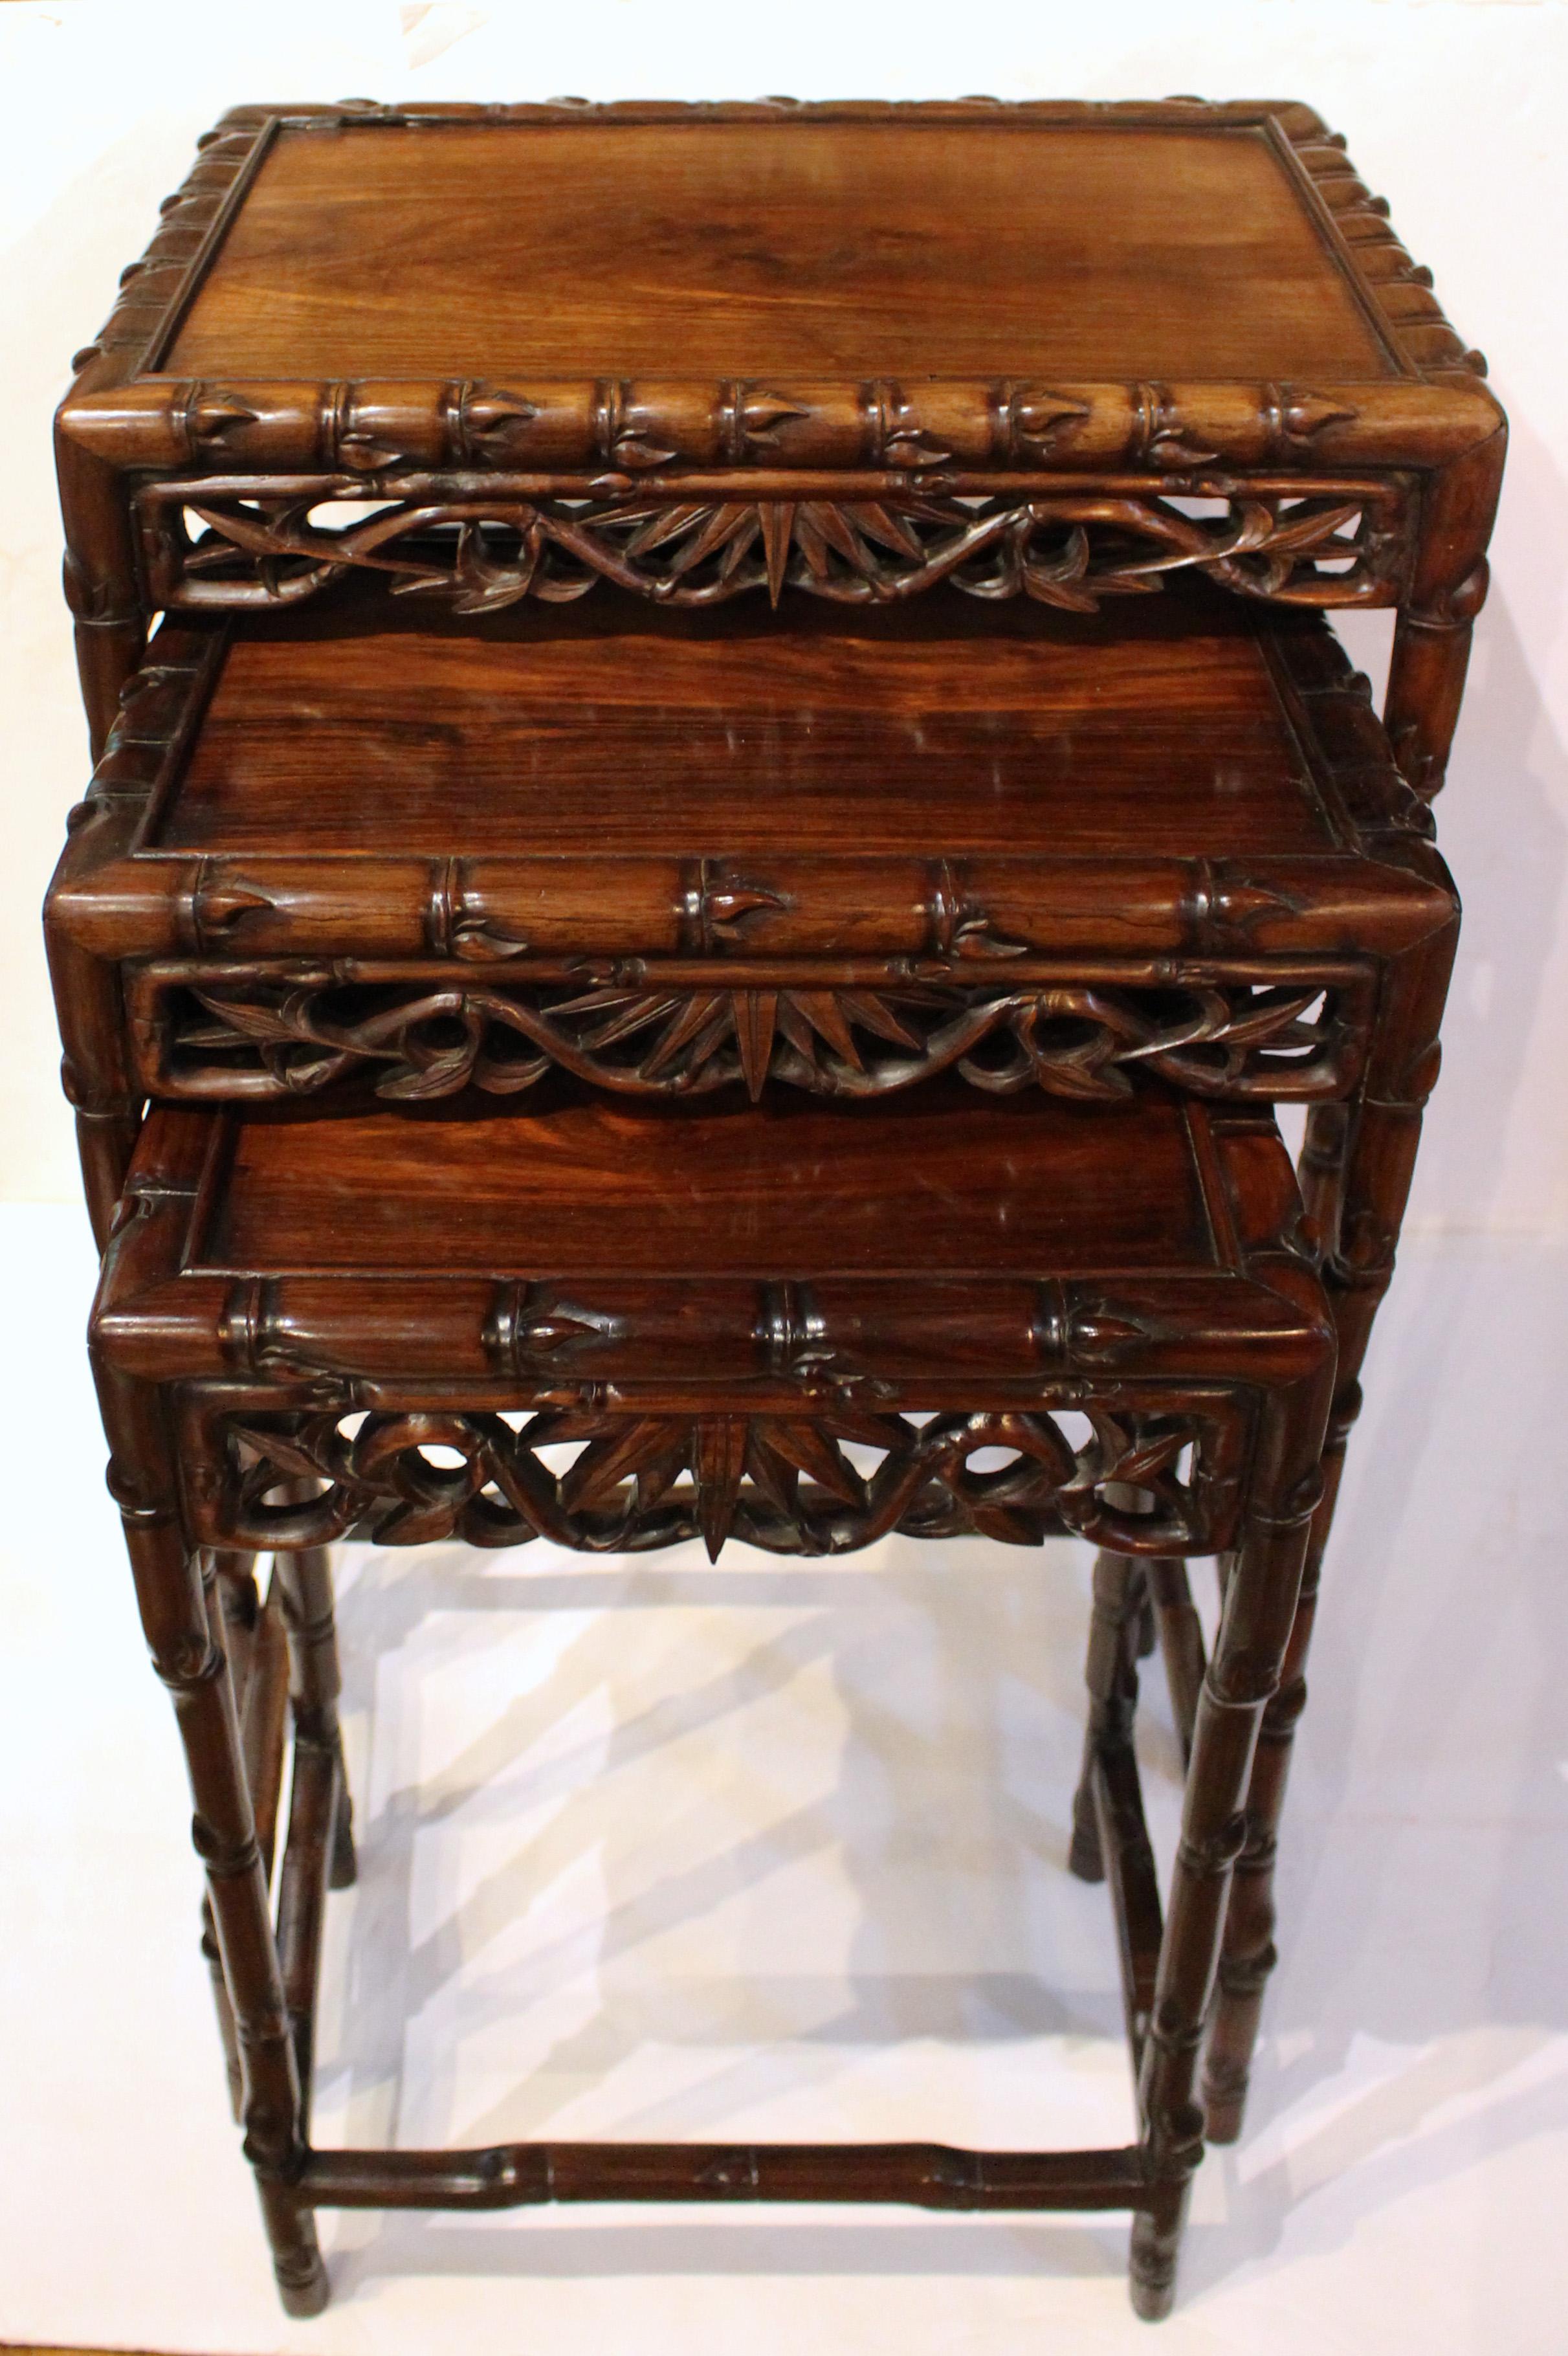 Circa 1865 set of 3 nesting tables, Chinese. Rosewood. Robust faux bamboo & bamboo leaf carvings. 3/4 stretchered. Excellent quality. Largest: 20 3/4